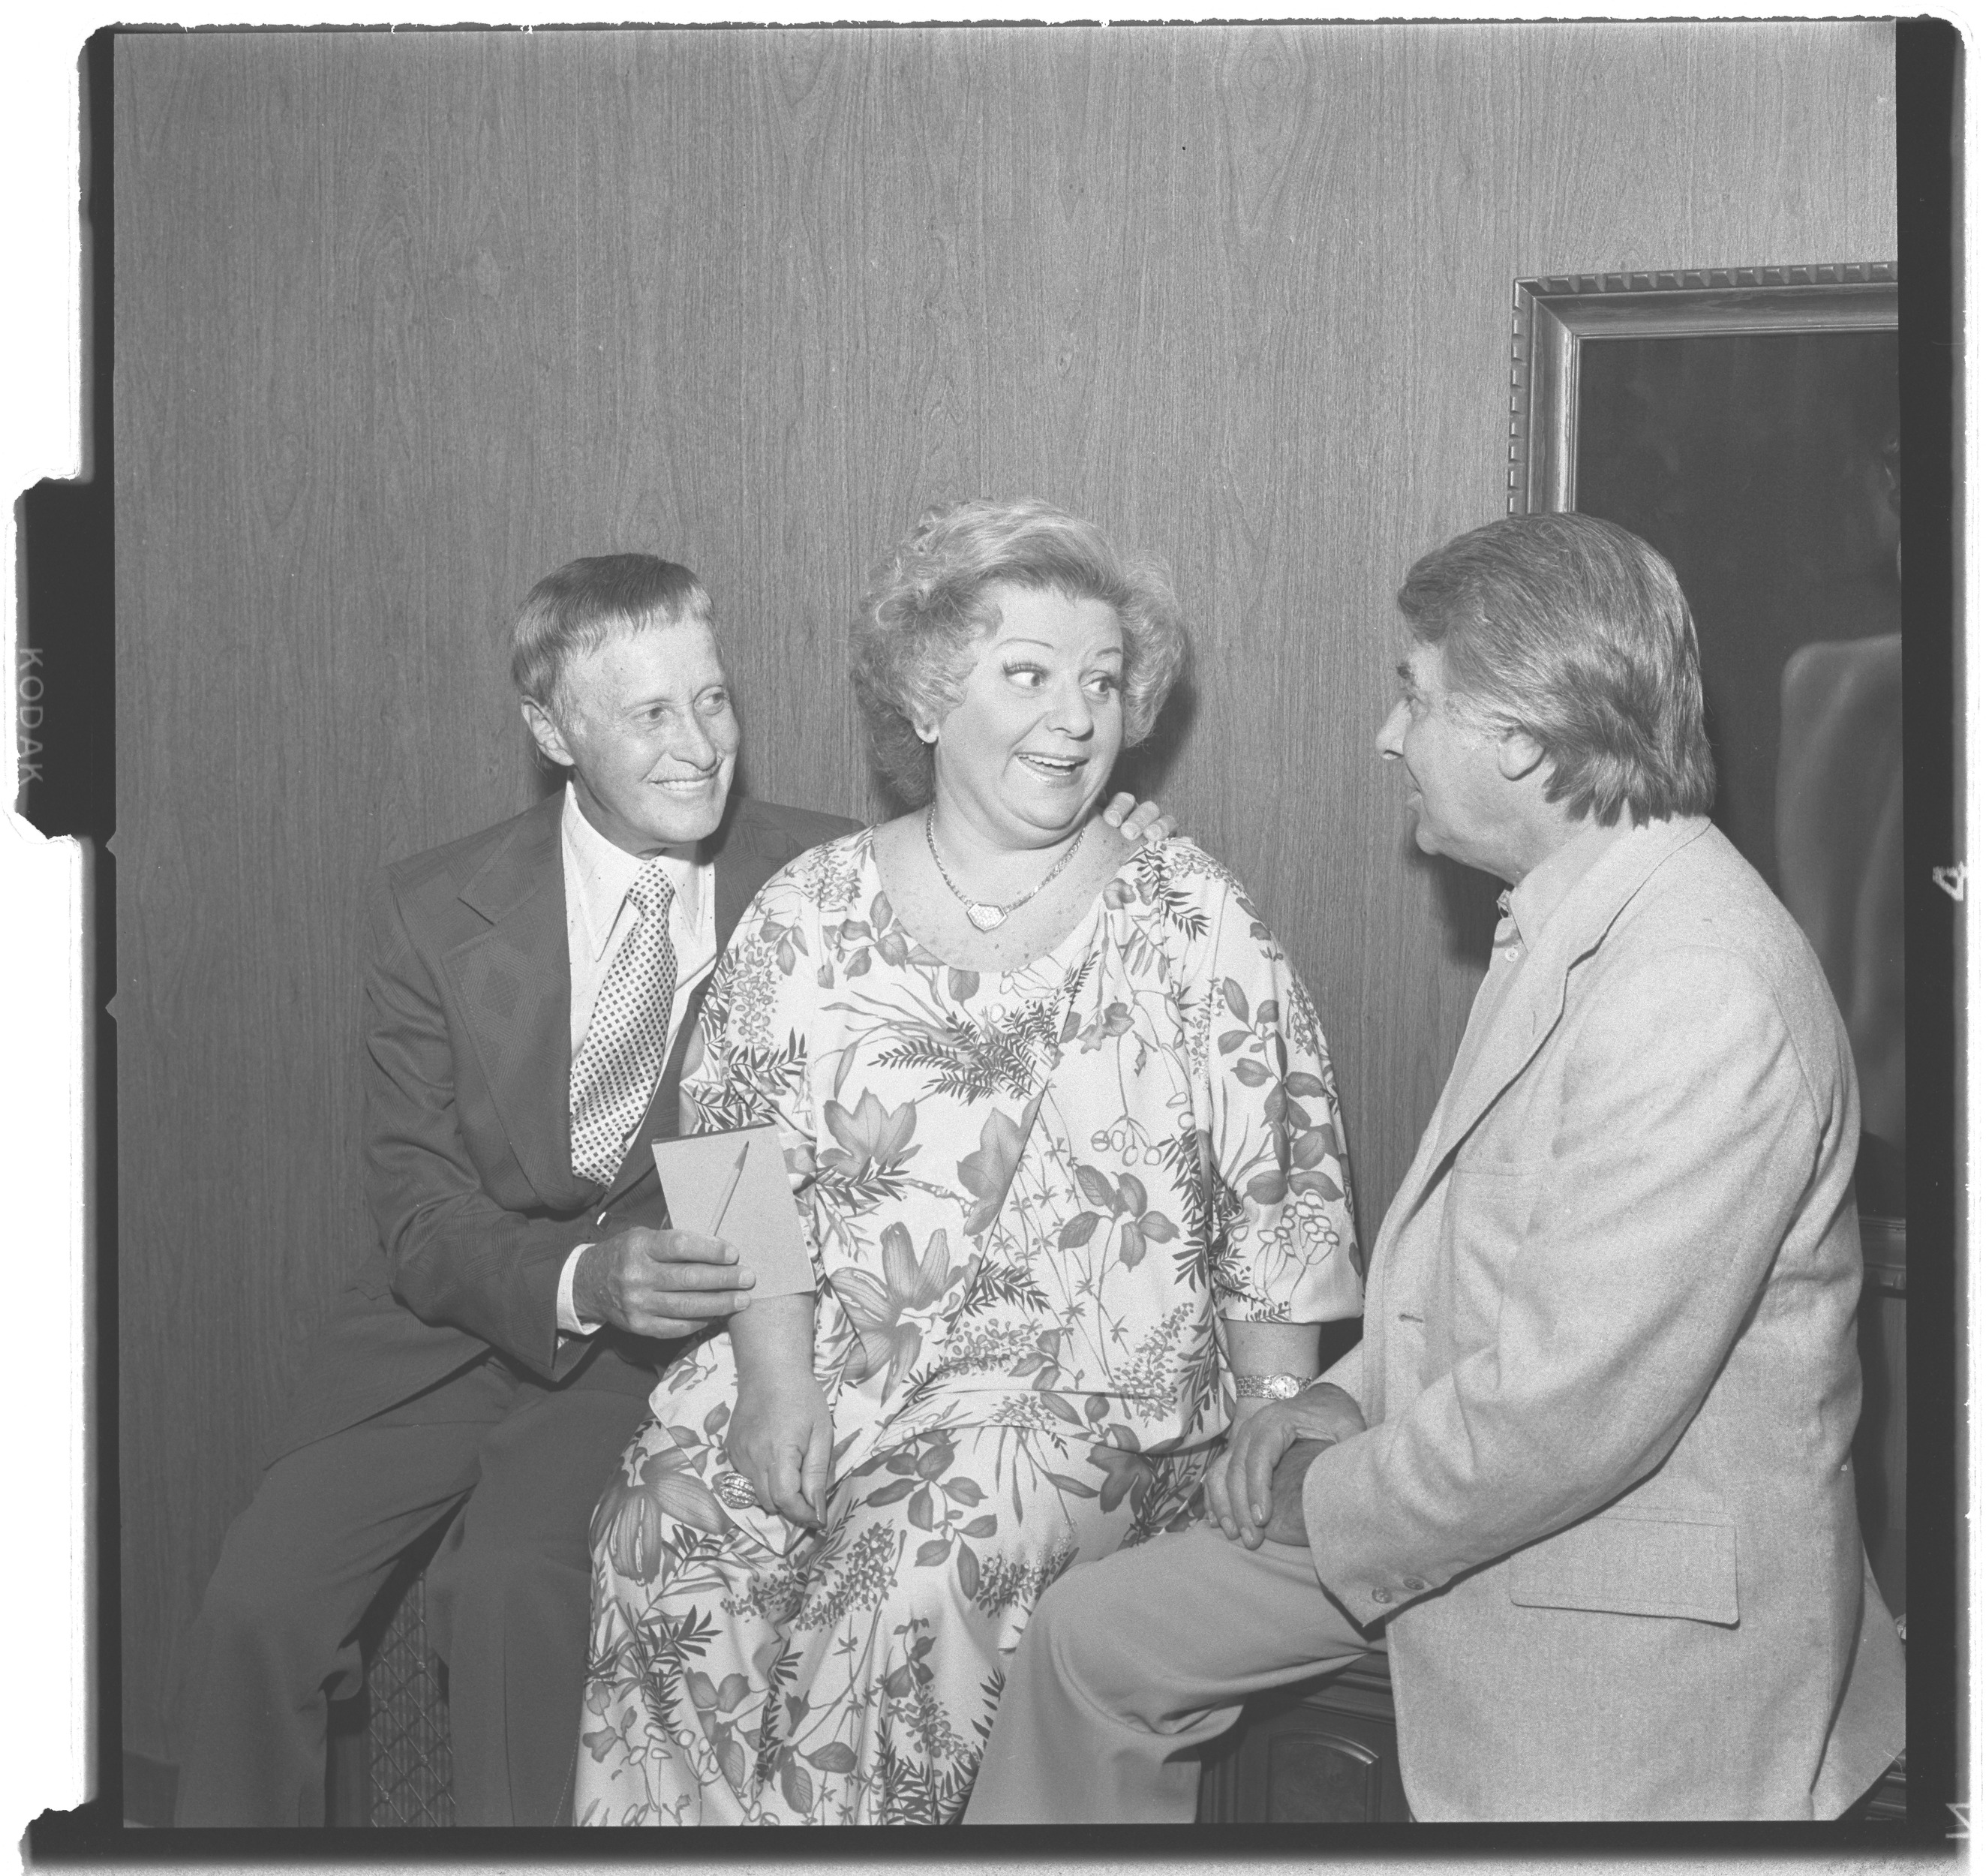 Photographs of Molasky, Susan and Totie Fields, image 04